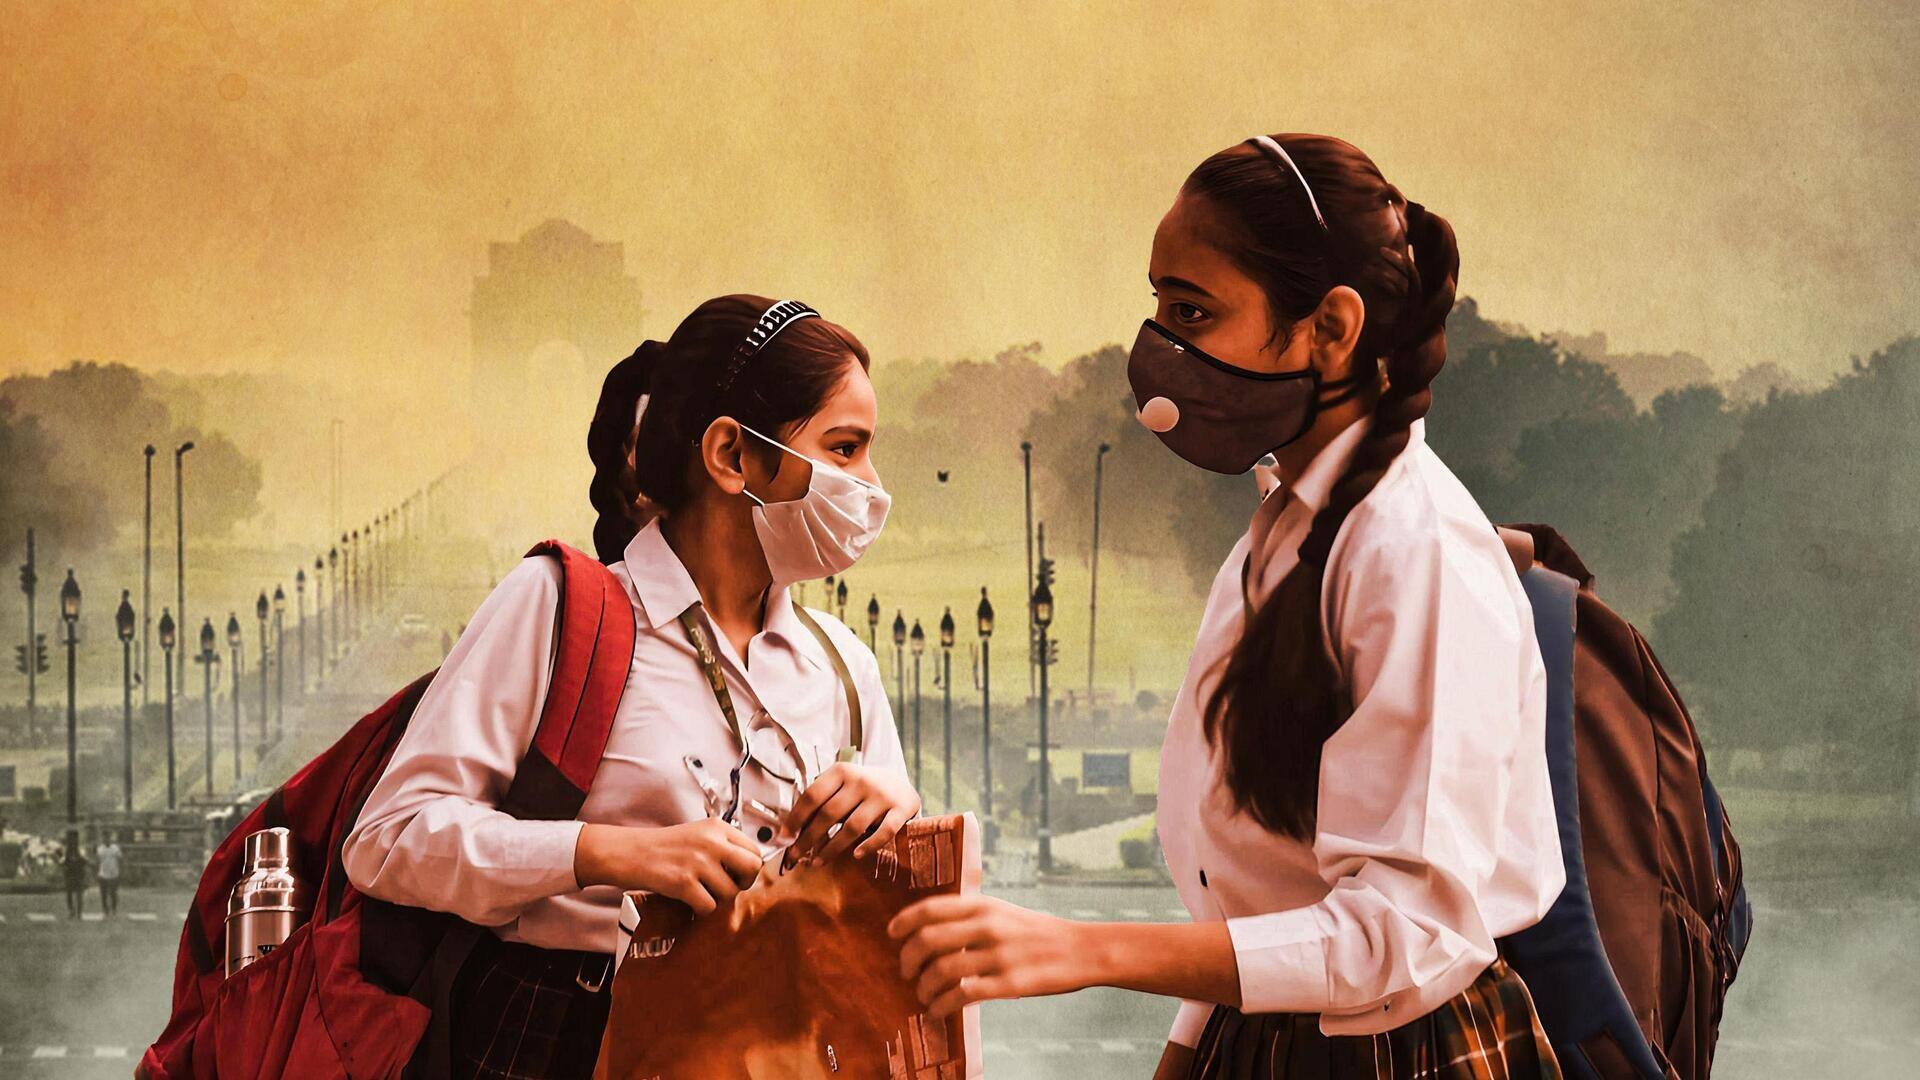 Schools, colleges reopen as Delhi air quality remains 'very poor'